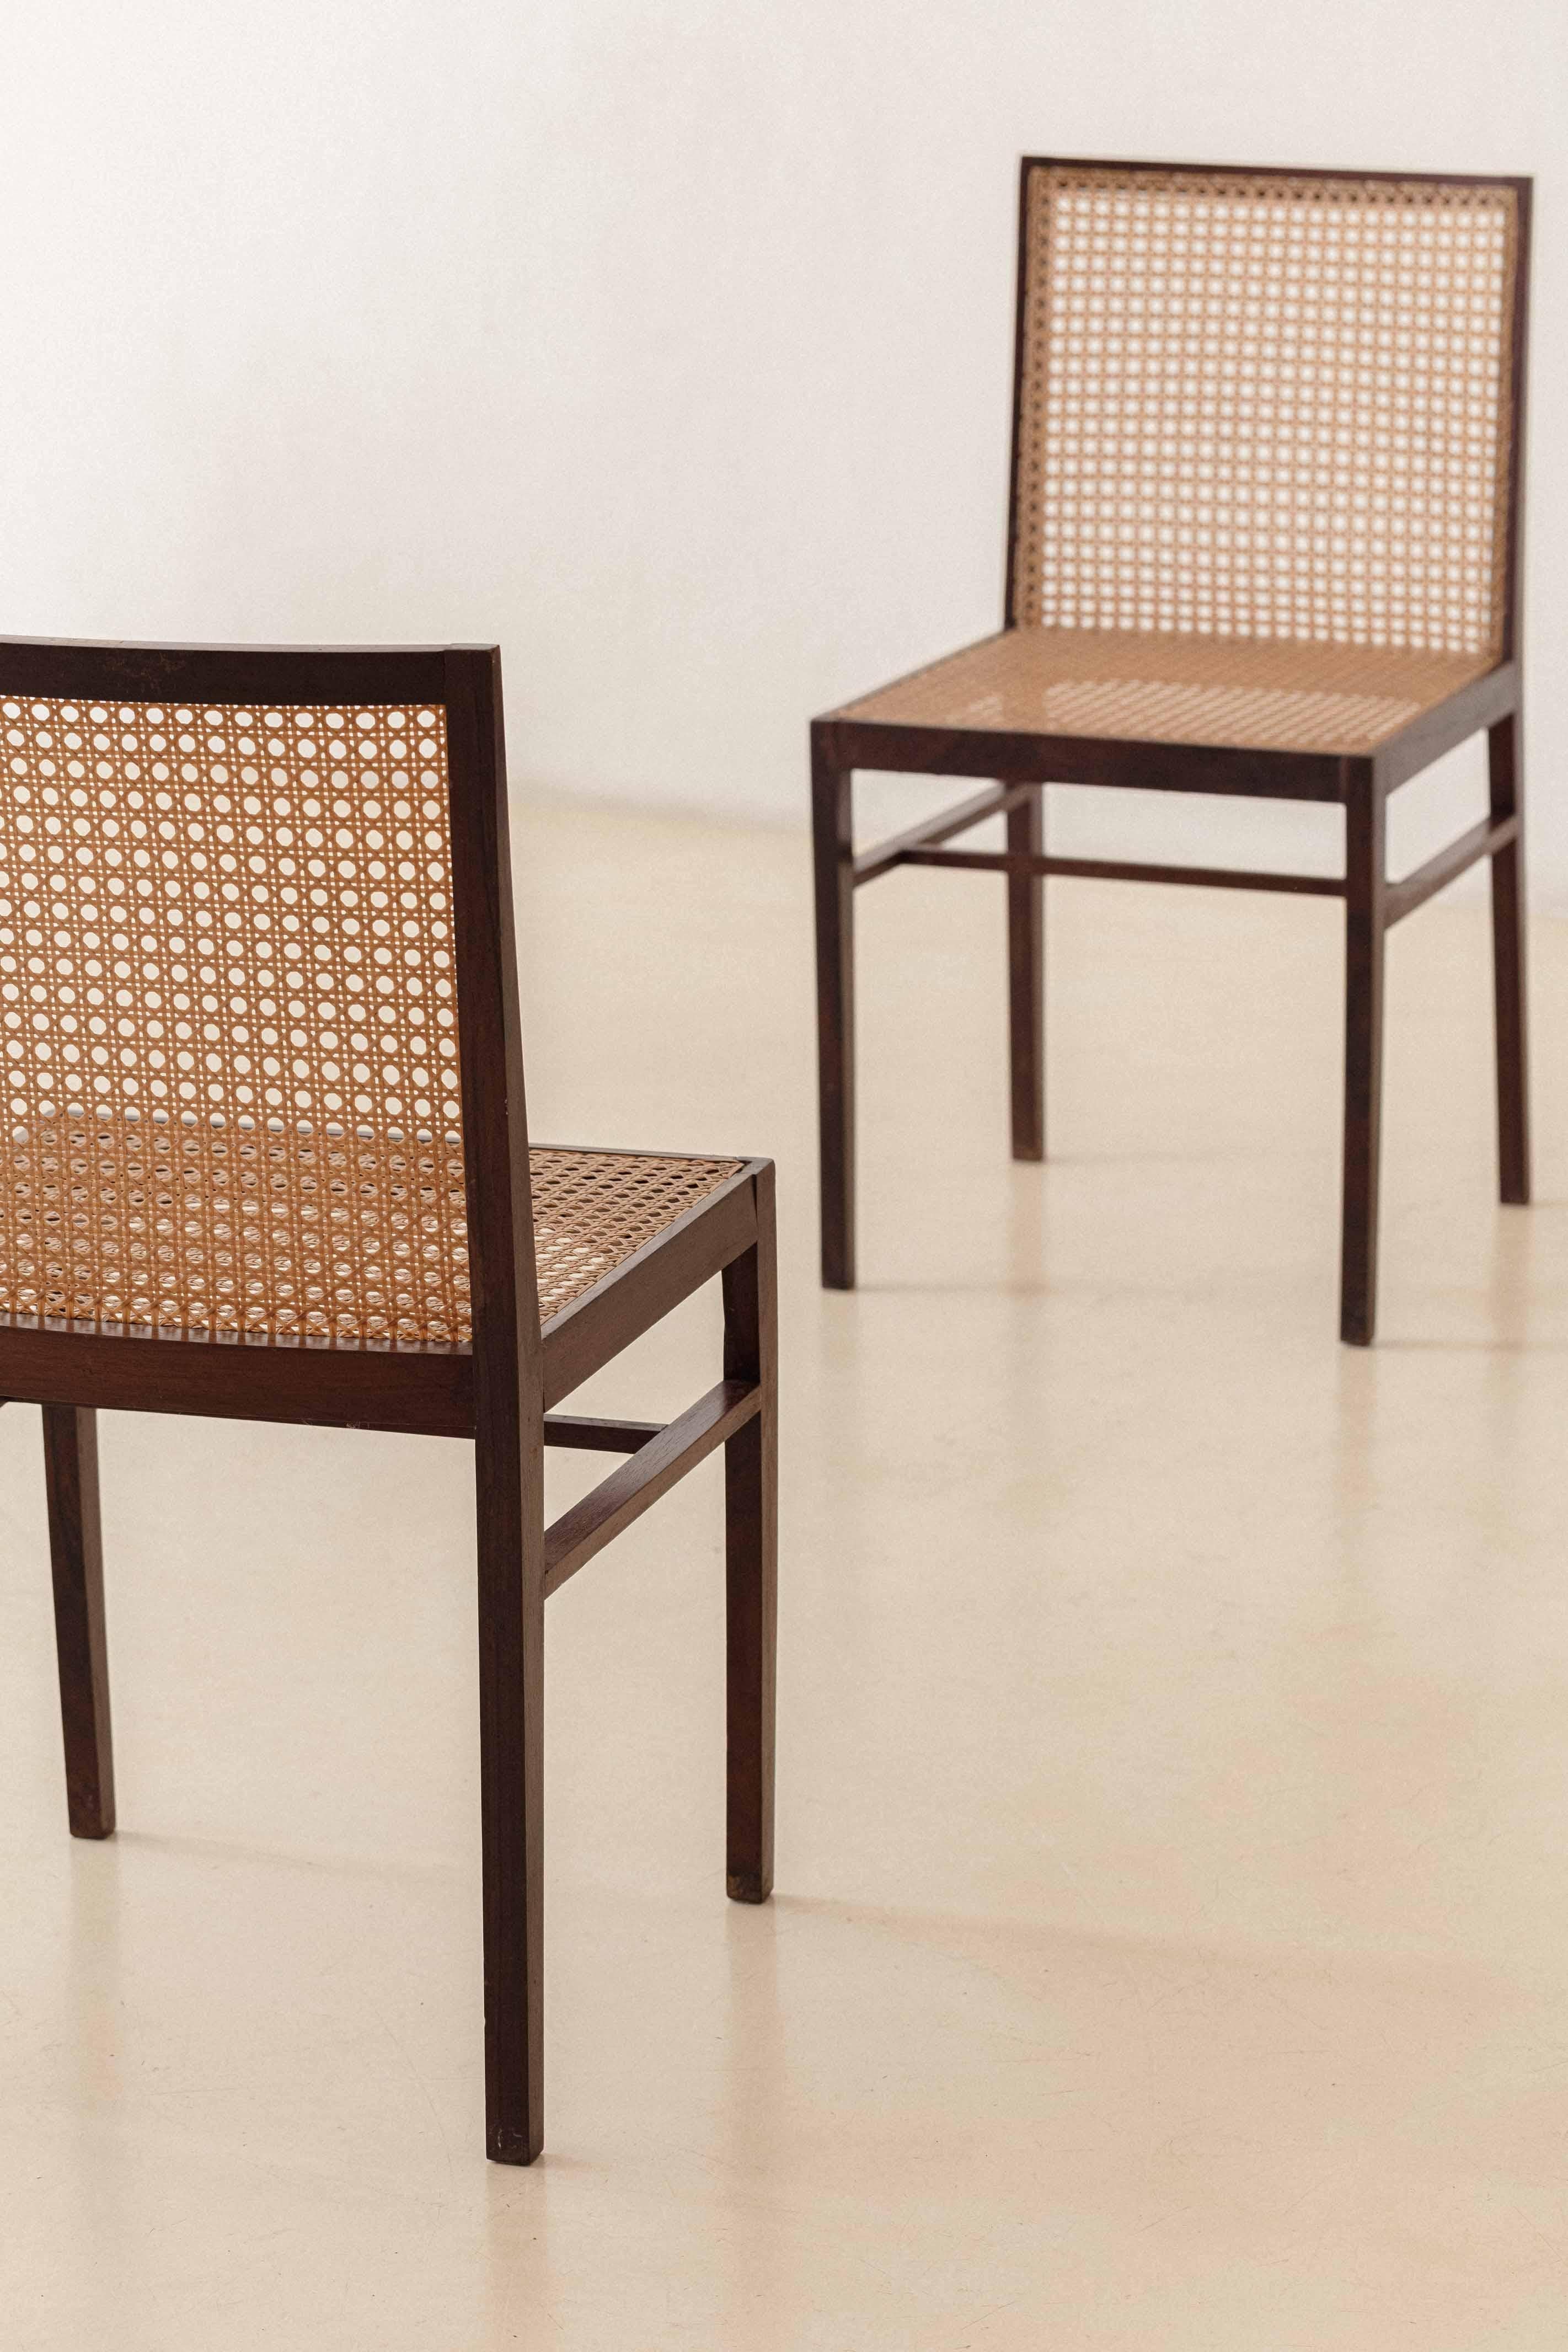 Set of Six Rosewood and Cane Dining Chairs, Brazilian Midcentury Design, 1960s For Sale 5